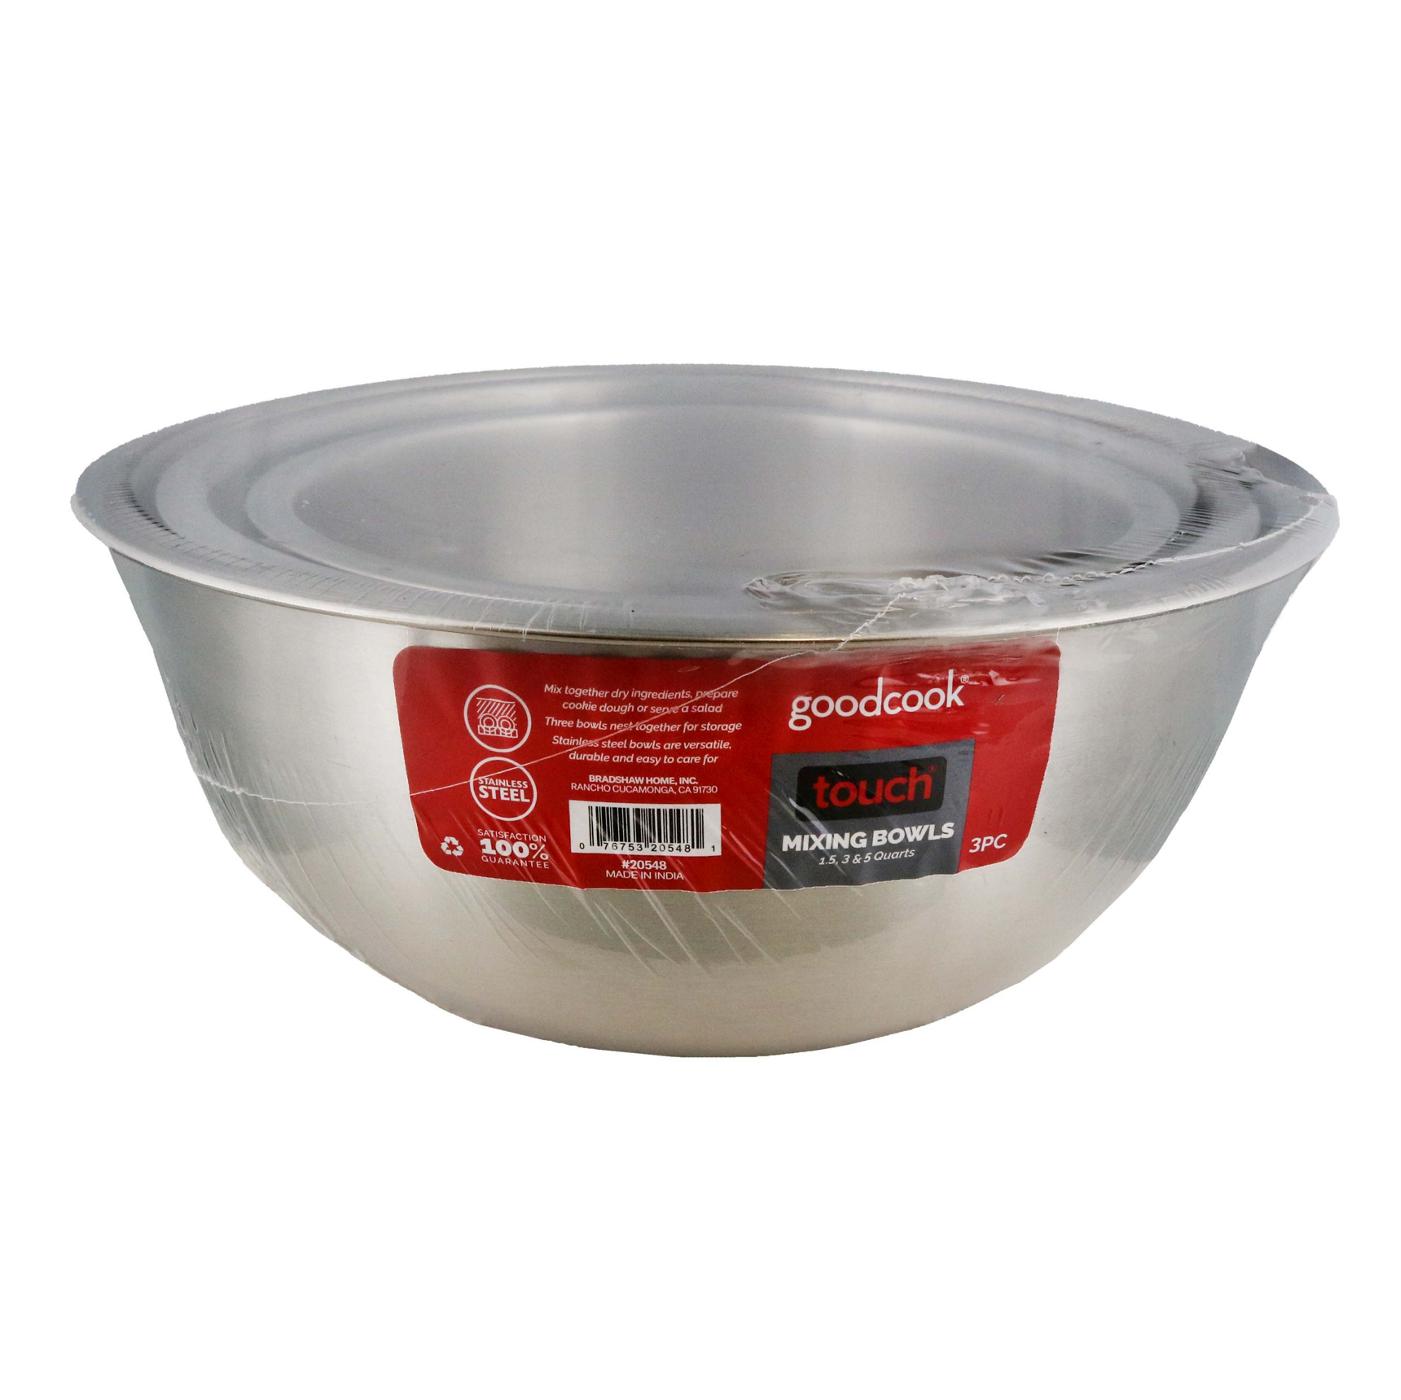 GoodCook Touch Stainless Steel Mixing Bowl Set; image 1 of 2